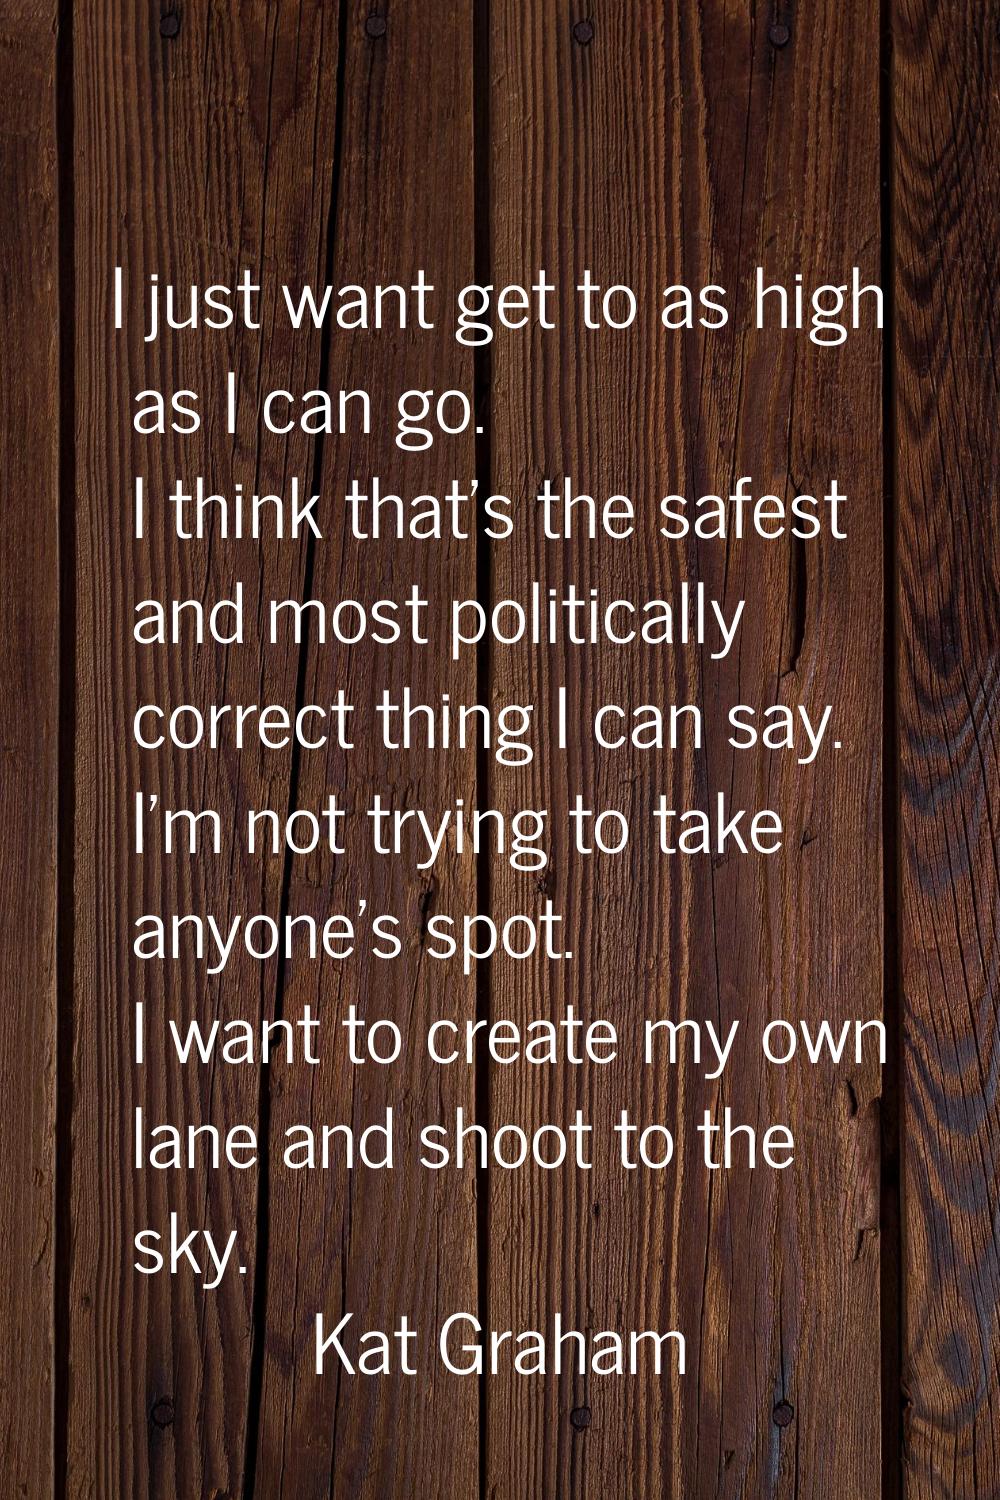 I just want get to as high as I can go. I think that's the safest and most politically correct thin